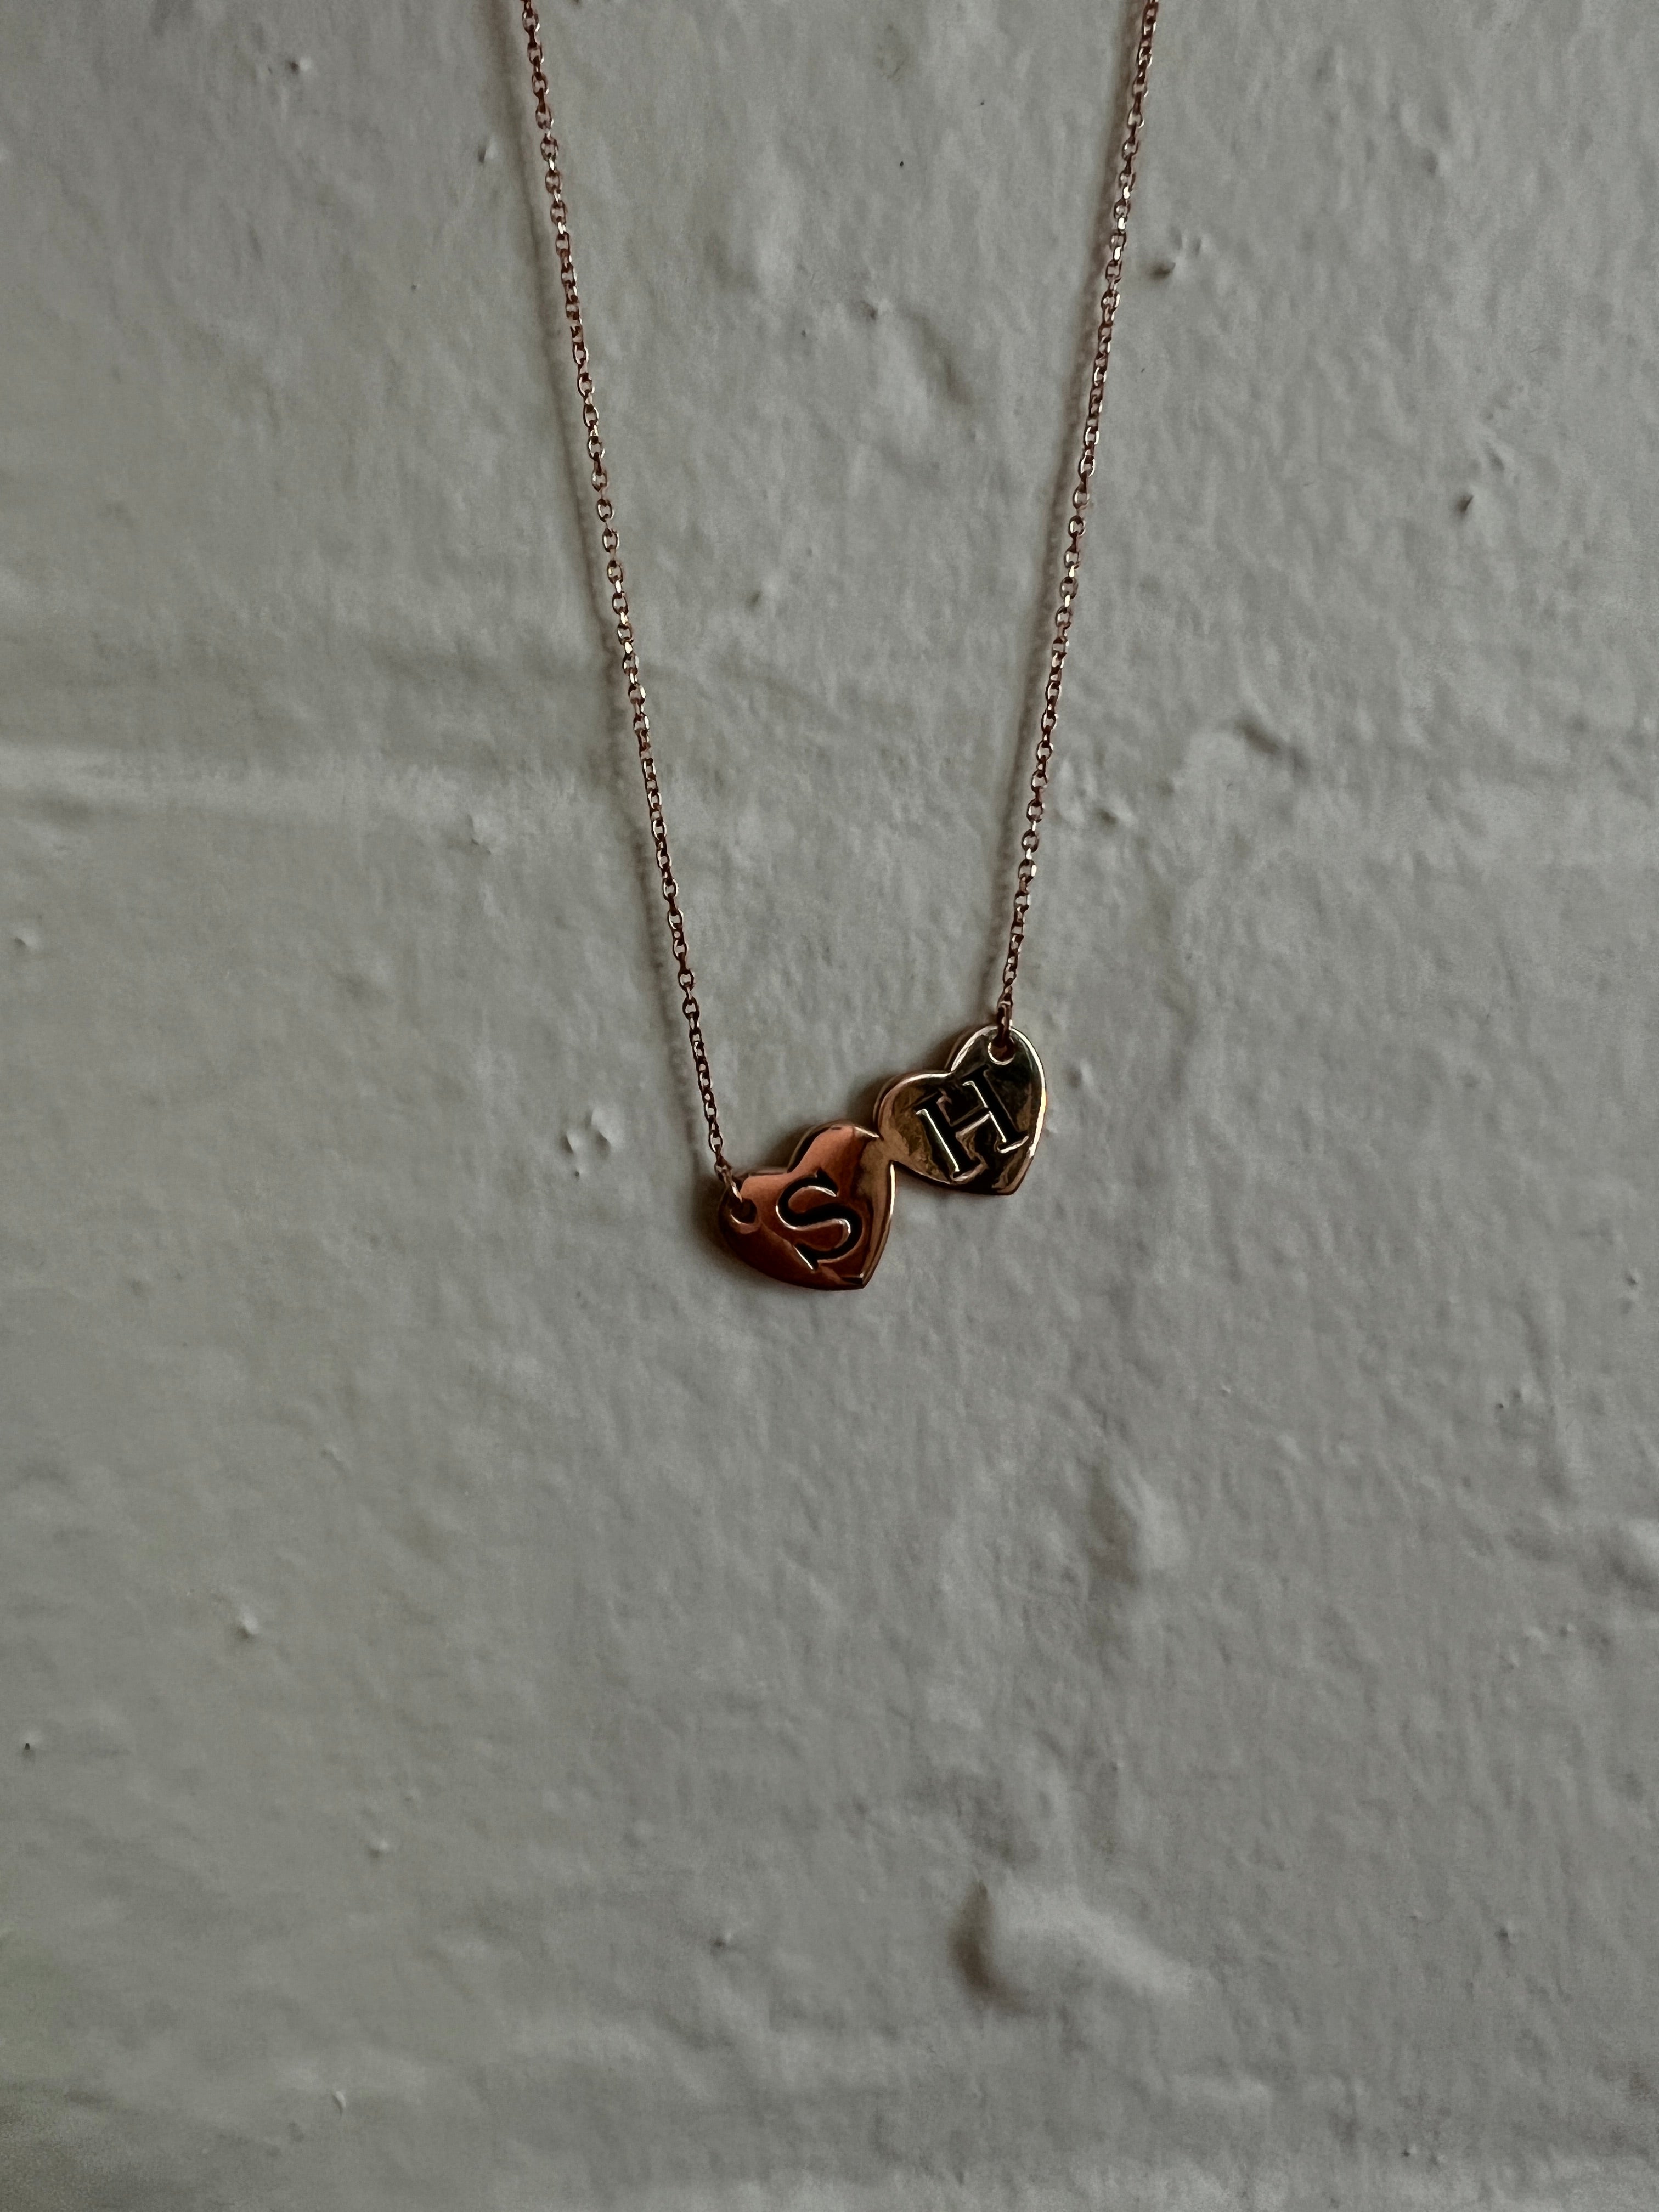 $ALE - Double Happiness Necklace Rose Gold